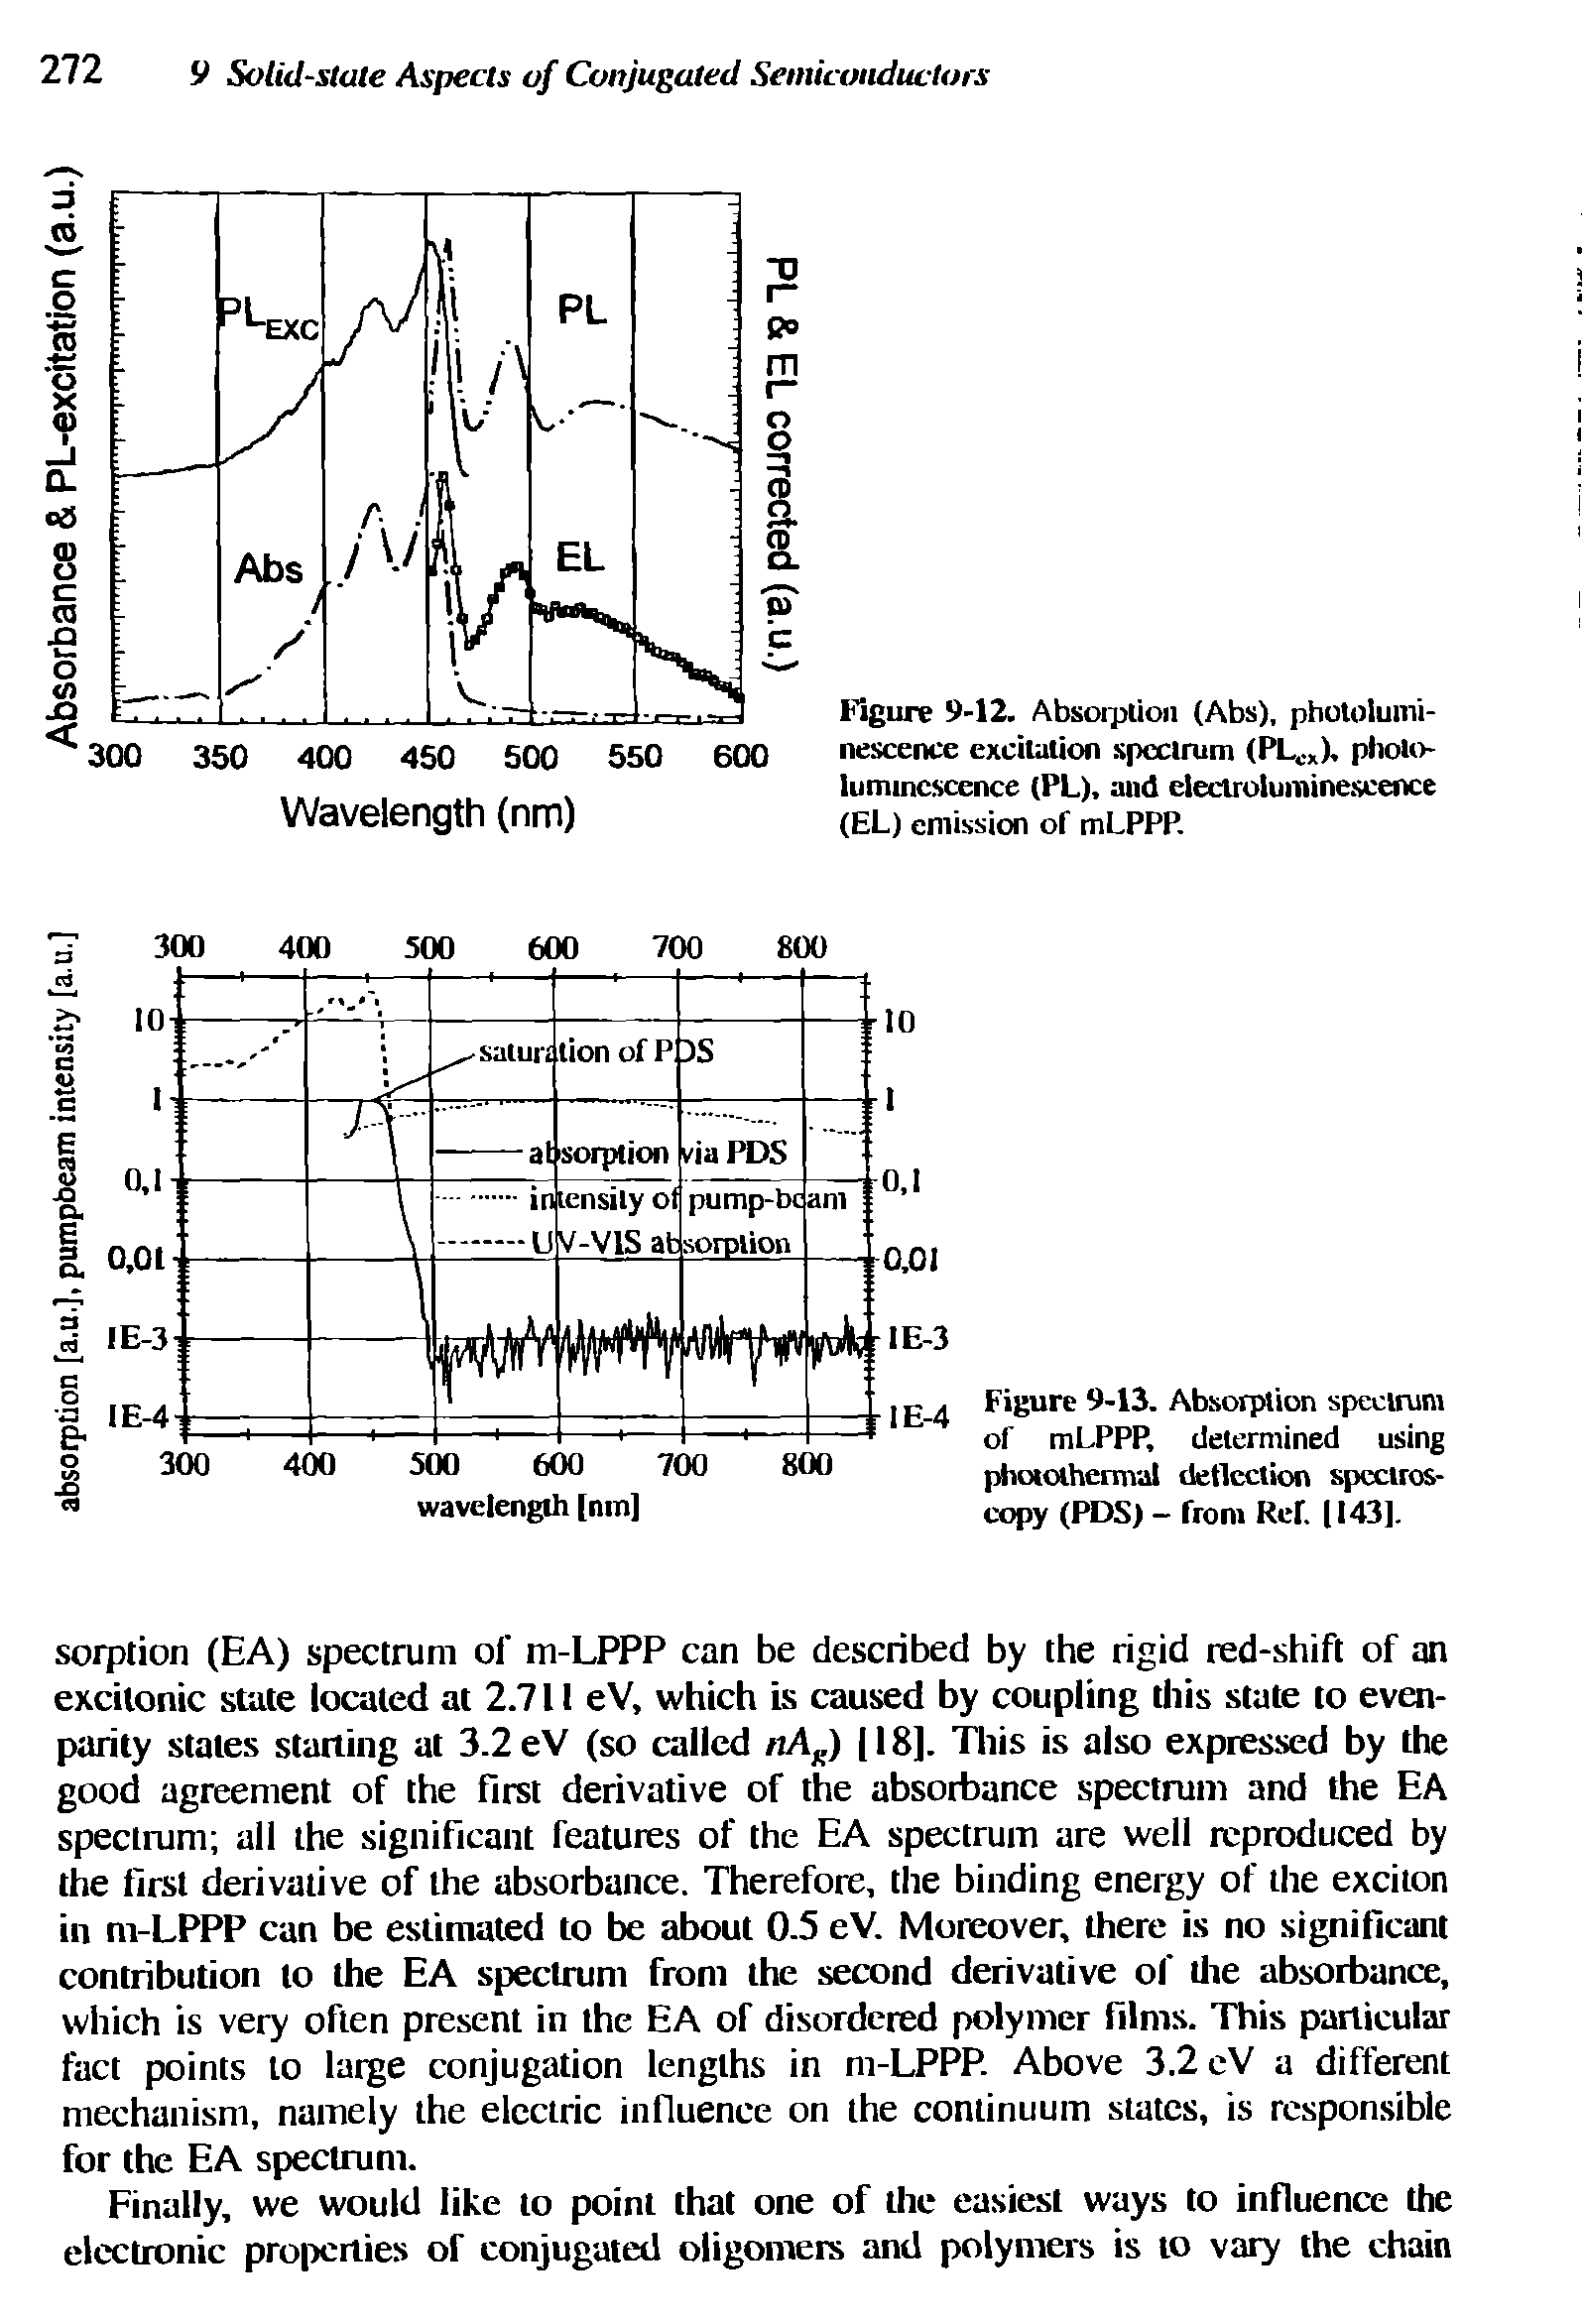 Figure 9-12. Absorption (Abs), photoluminescence excitation spectrum (PLCX), pholo-lumincscence (PL), and electroluminescence (EL) emission of mLPPP.